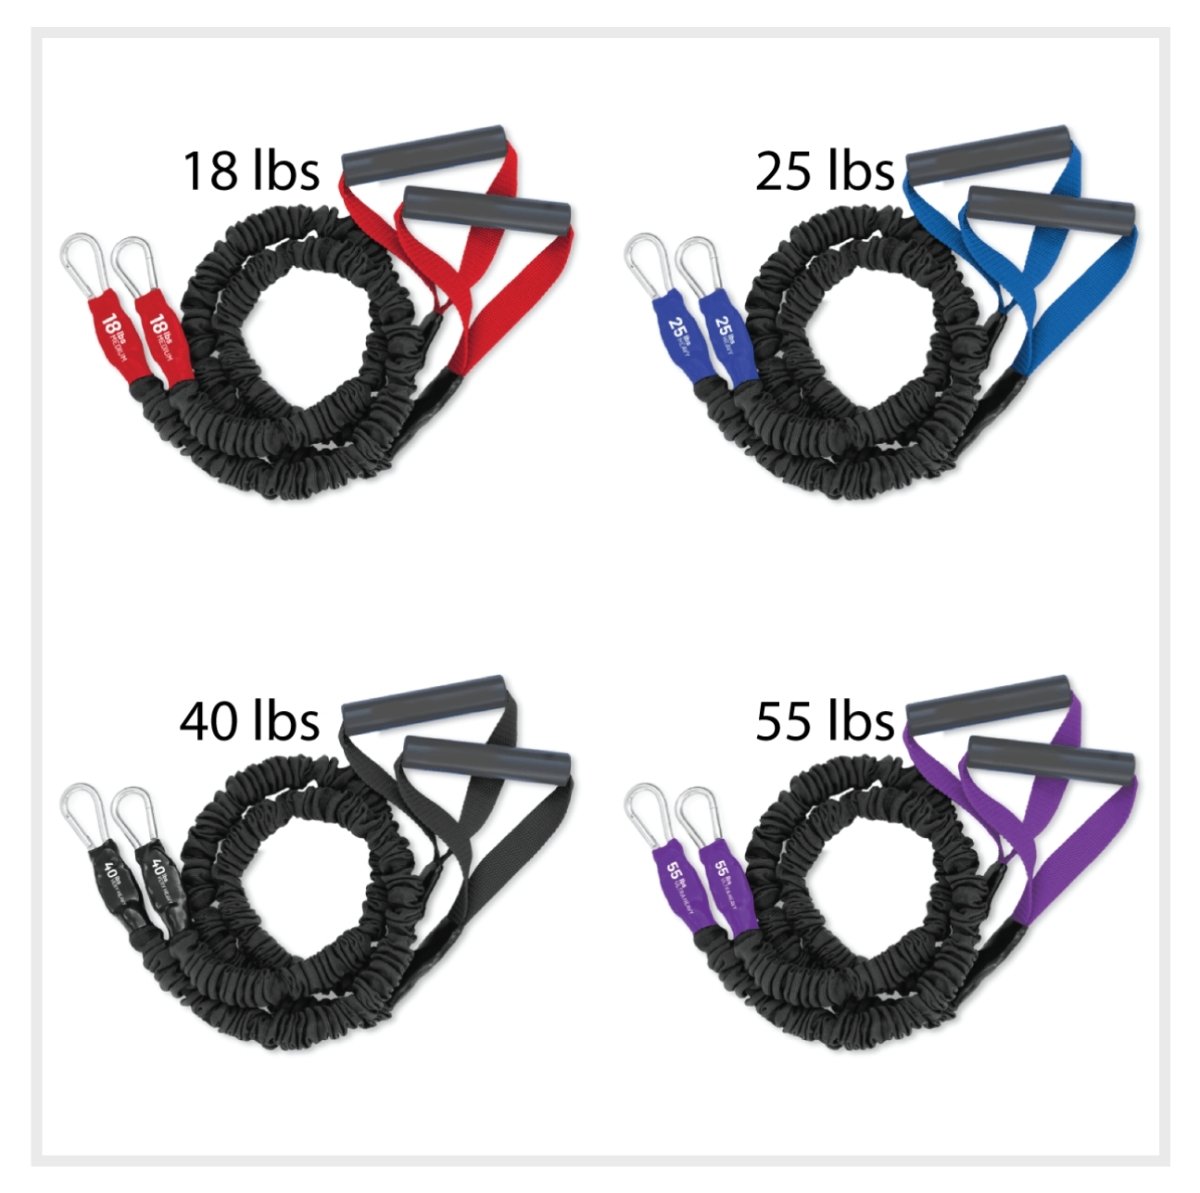 X-Over Shoulder and Arm Resistance Bands- 4 Pack (18lb/25lb/40lb/55lb) - FitCord Resistance Bands American Made Covered Resistance tubes. Bands made in usa, shoulder and arm exercise bands